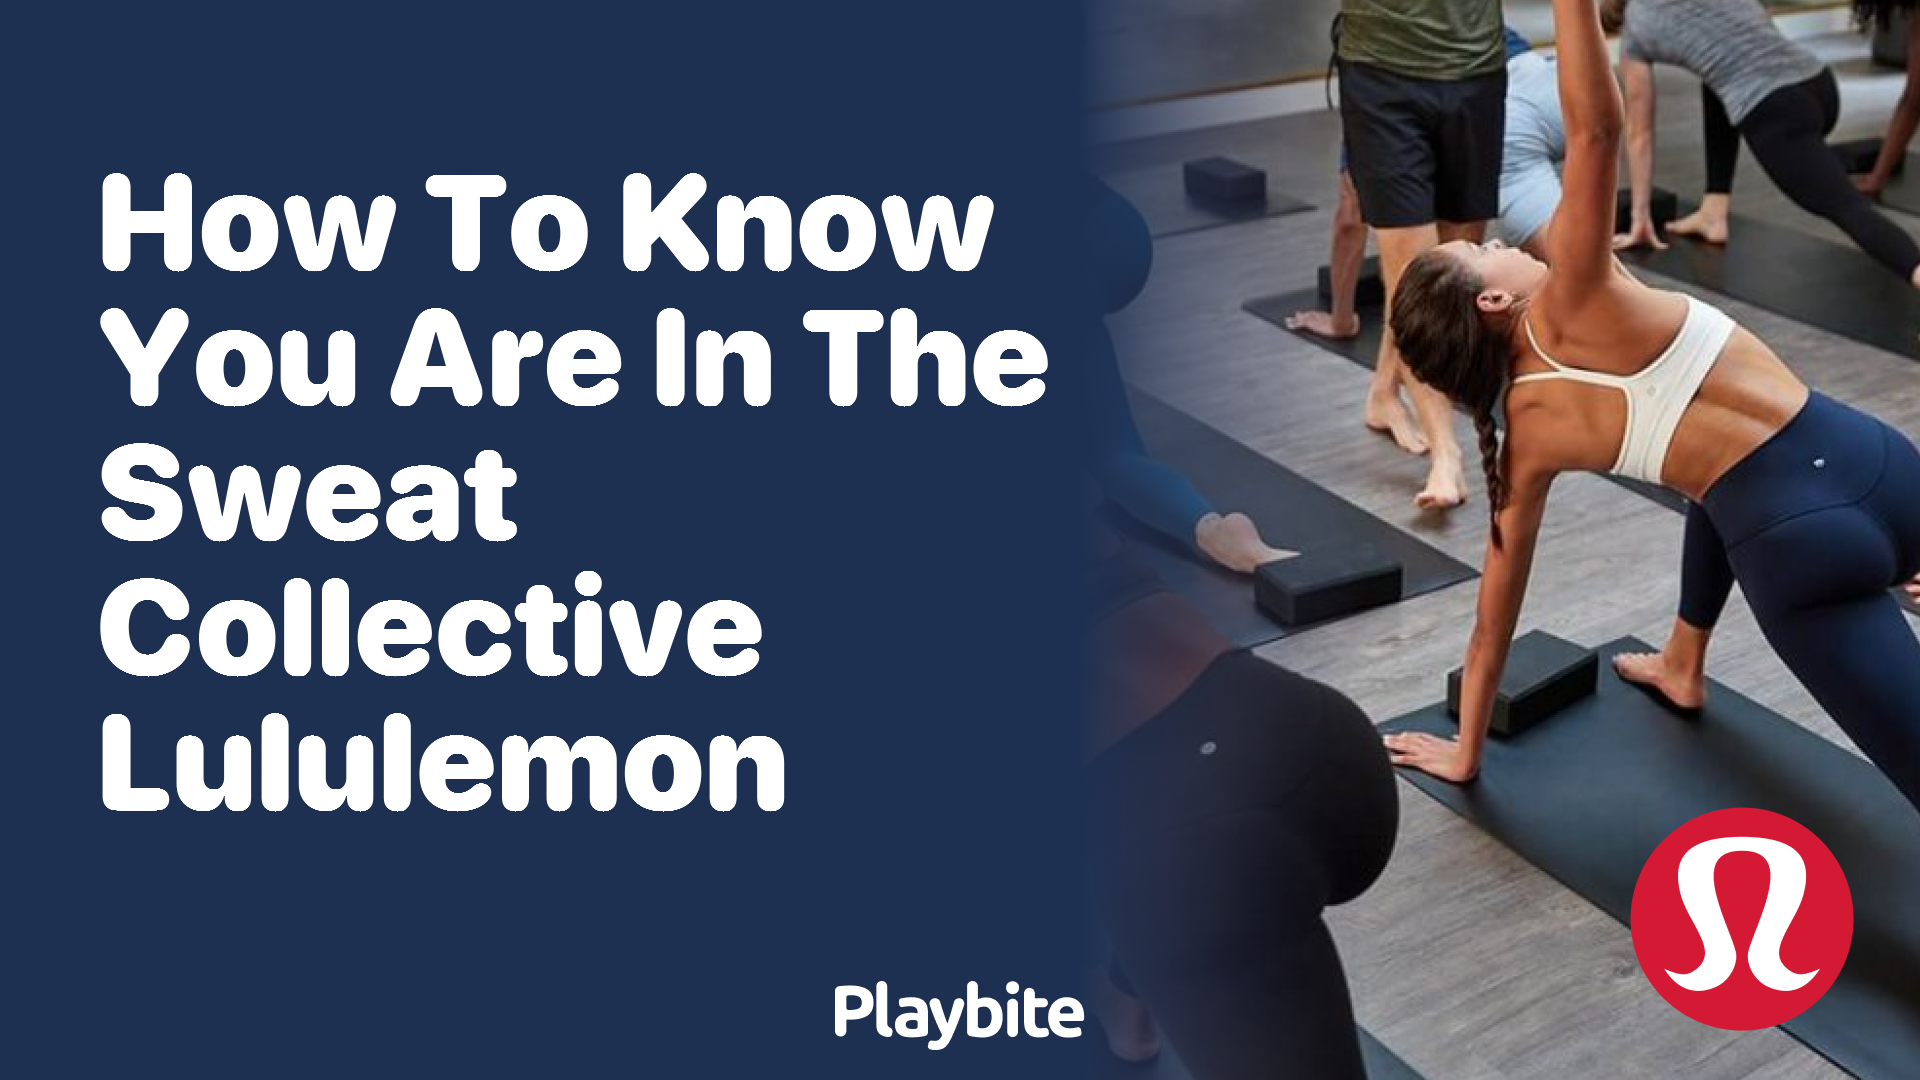 How to Know You Are in The Sweat Collective Lululemon - Playbite